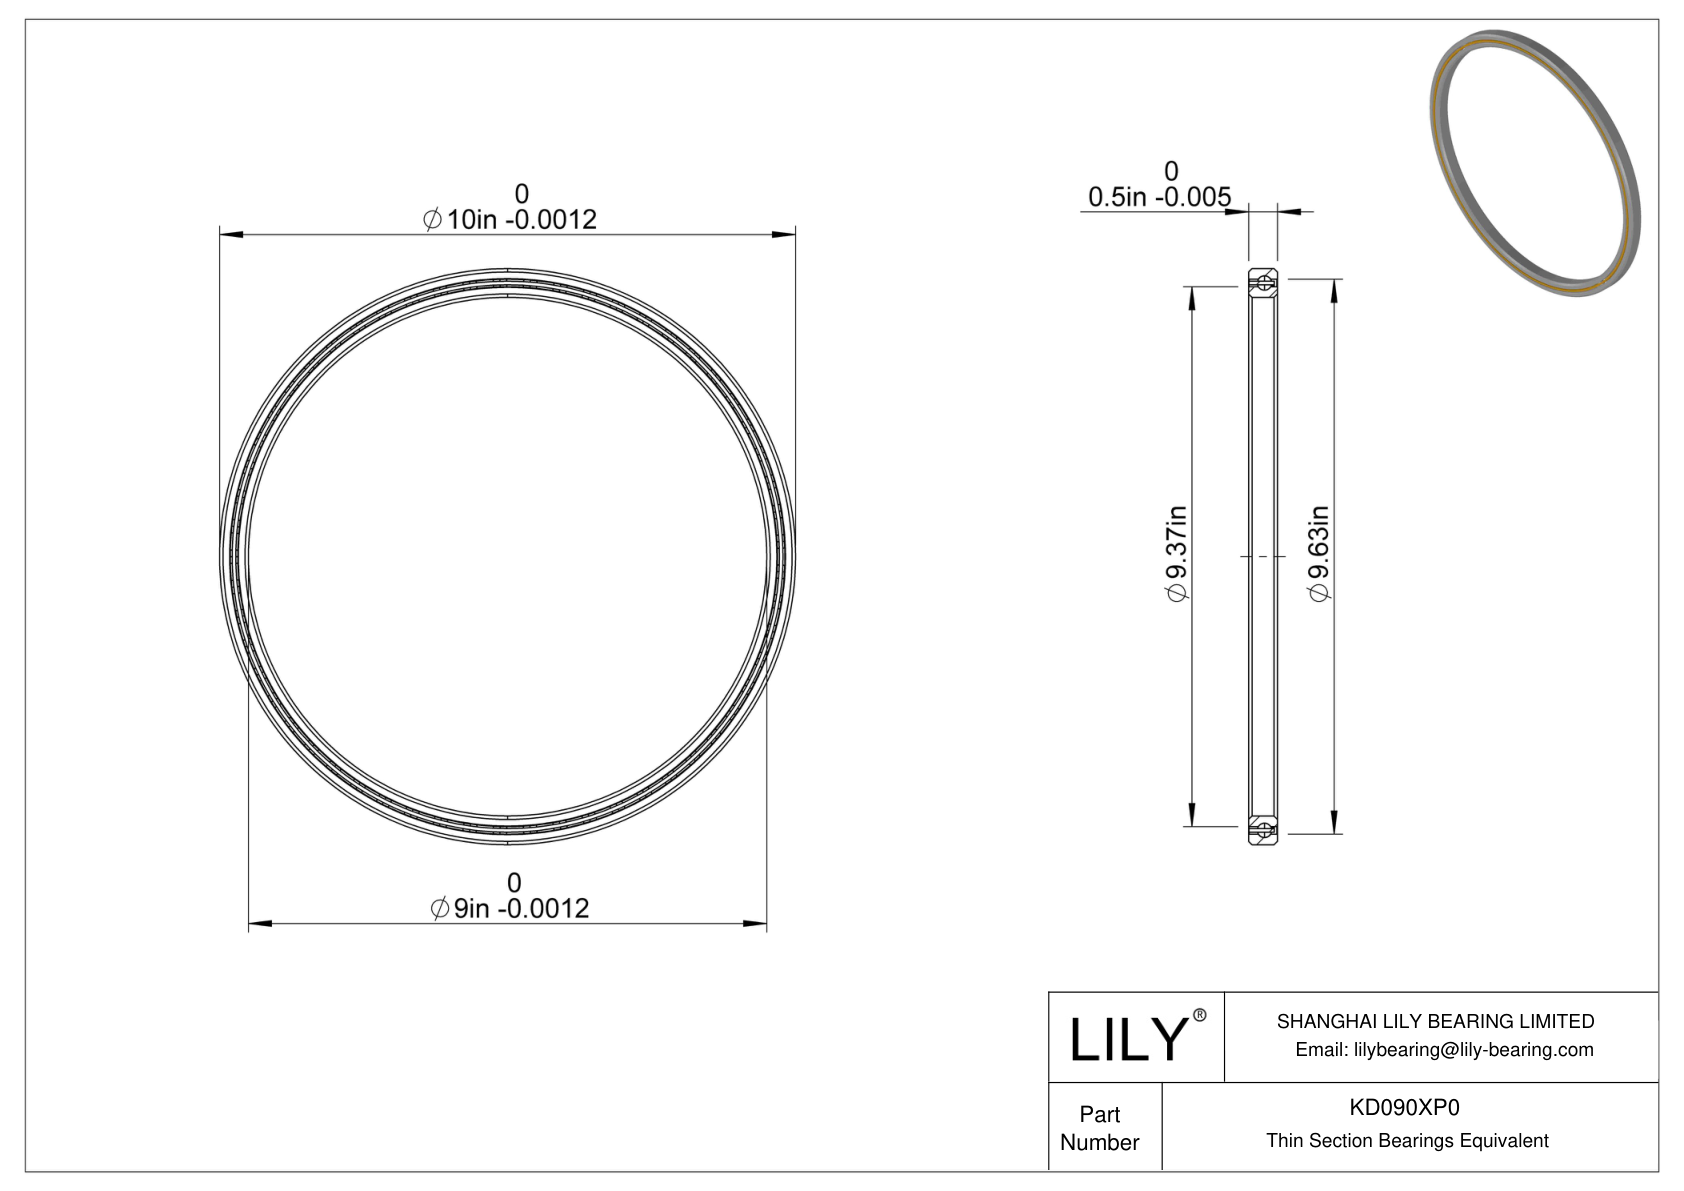 KD090XP0 Constant Section (CS) Bearings cad drawing